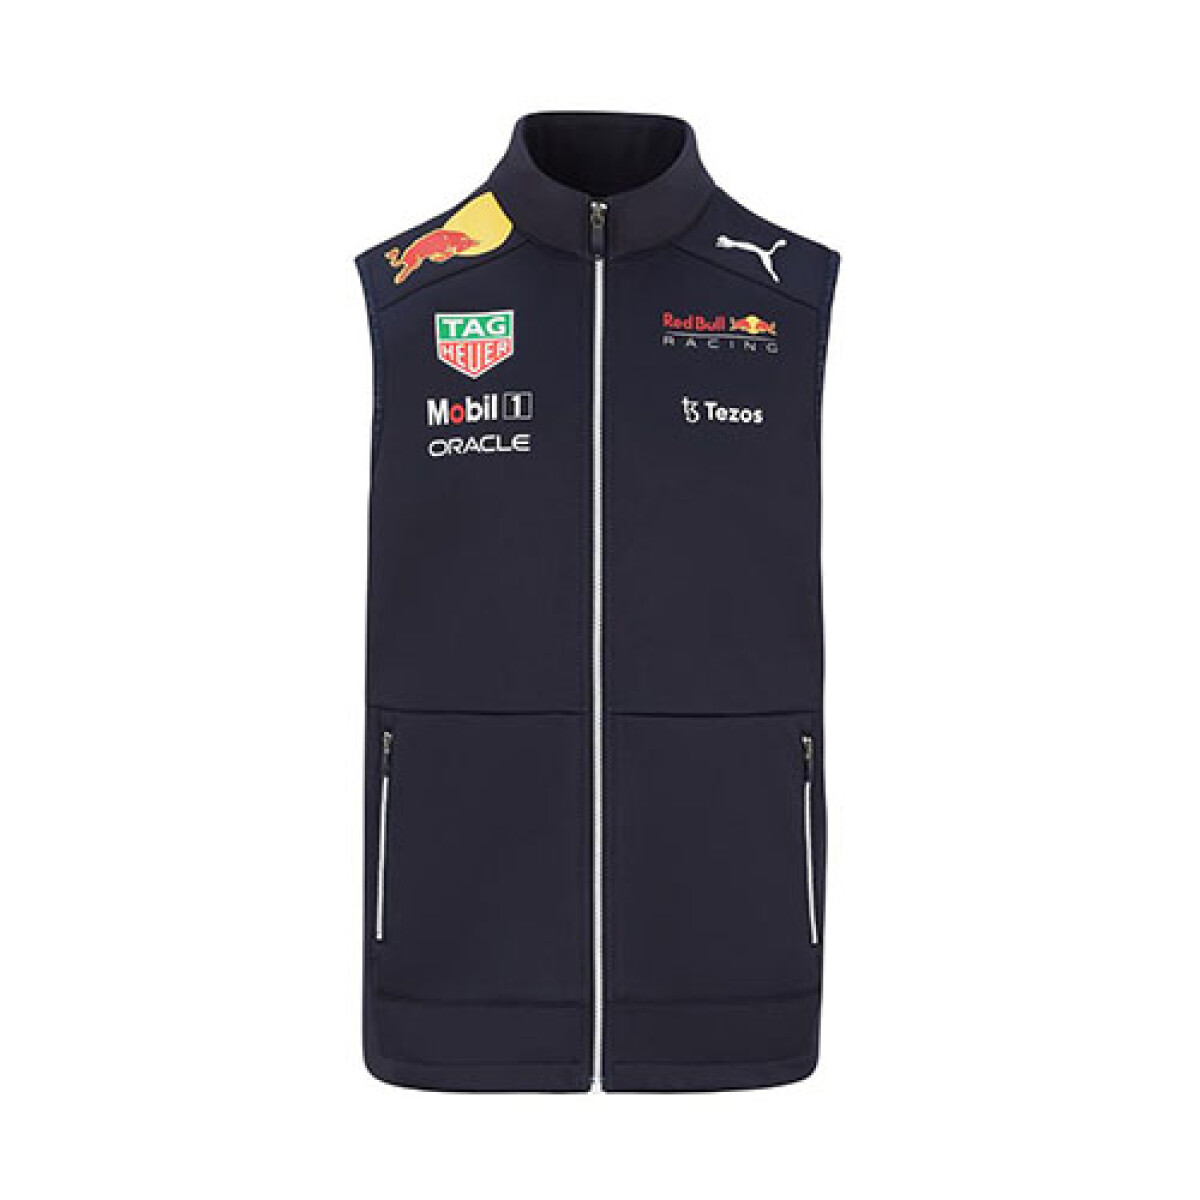 Chaleco Mobil 1 Red Bull Racing 